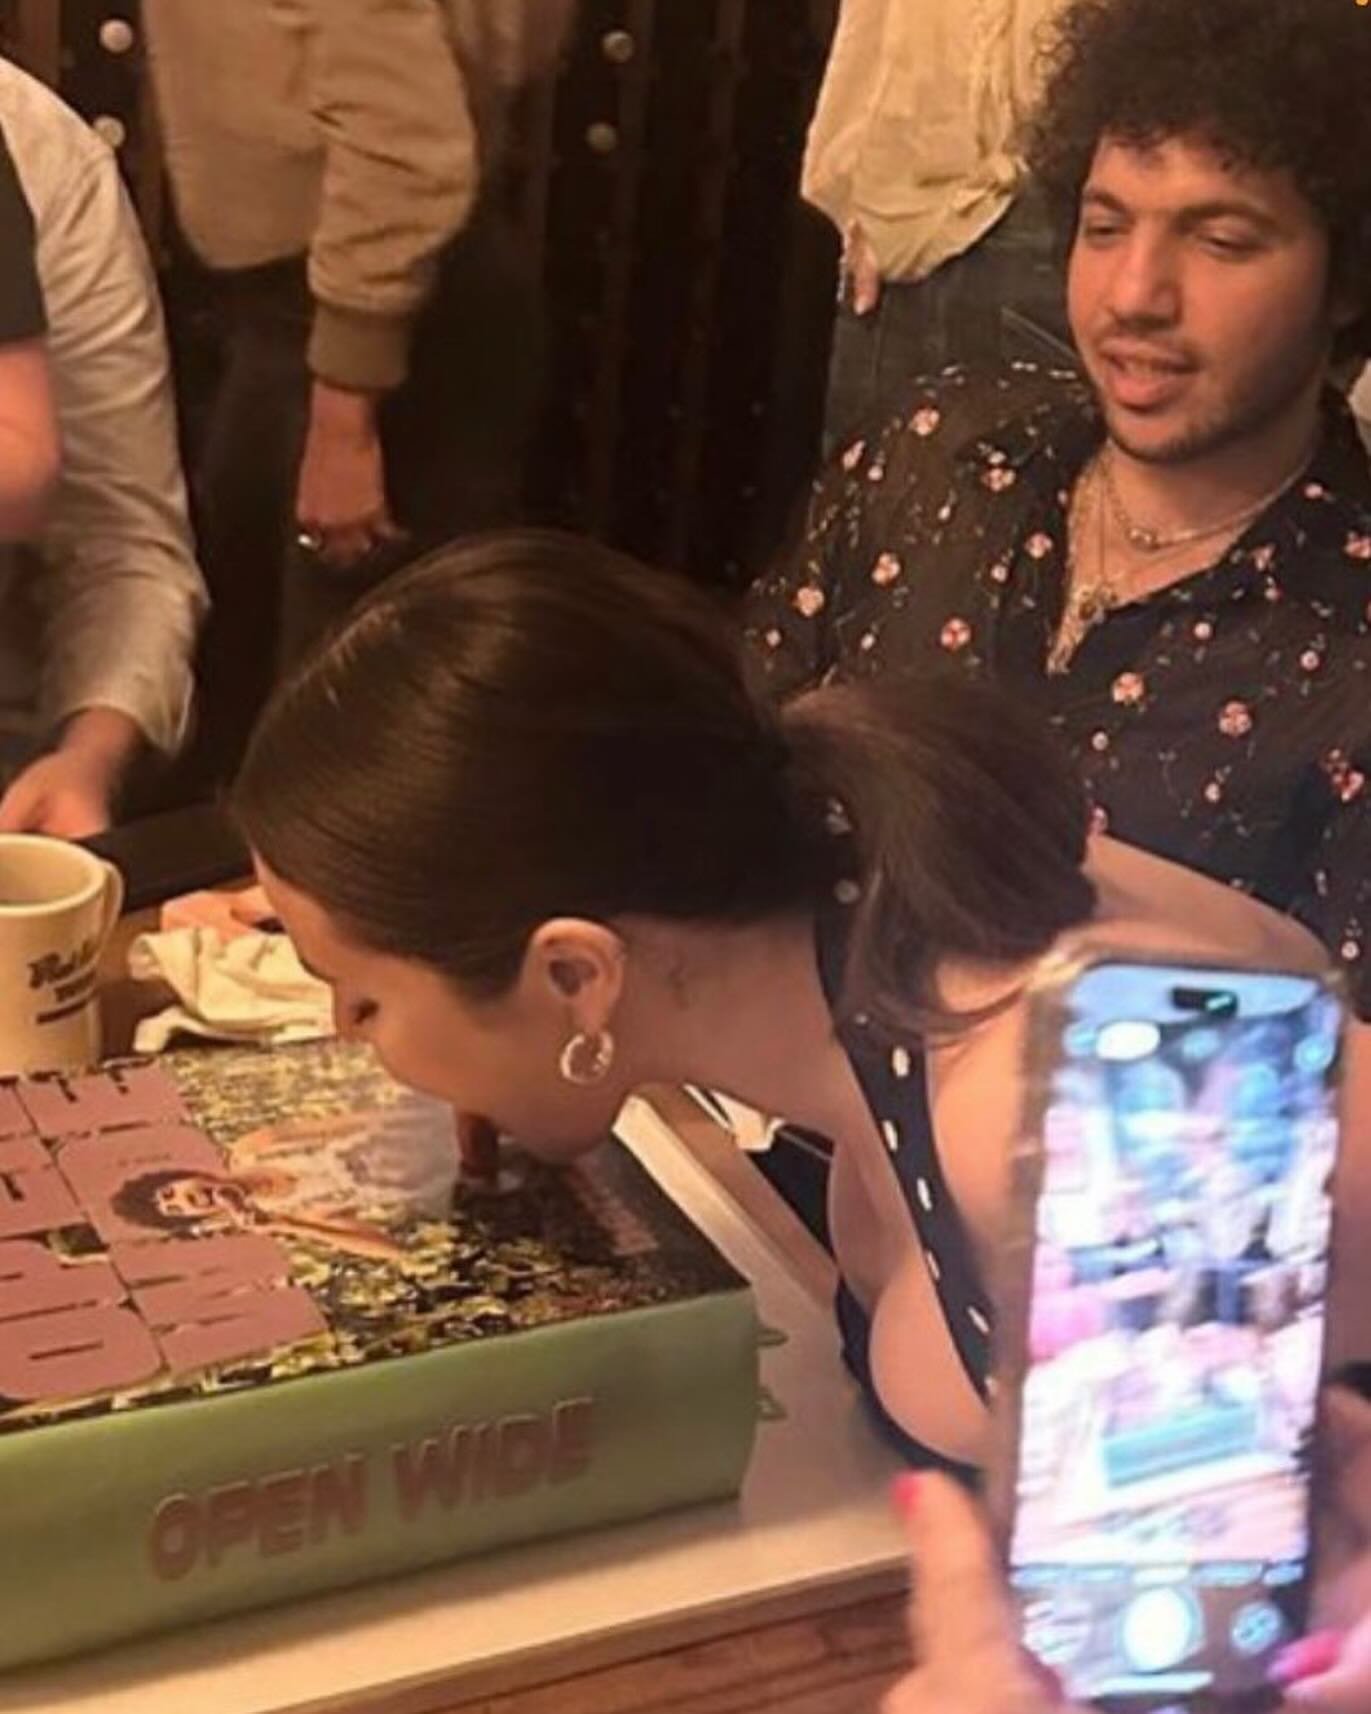 oh that&rsquo;s not&hellip; 

Selena Gomez licking boyfriend Benny Blanco&rsquo;s cake crotch to celebrate his new cooking book release. Benny looks rather uninterested in the shot&hellip; thoughts? #selenagomez #bennyblanco #selenaandbenny #popcultu